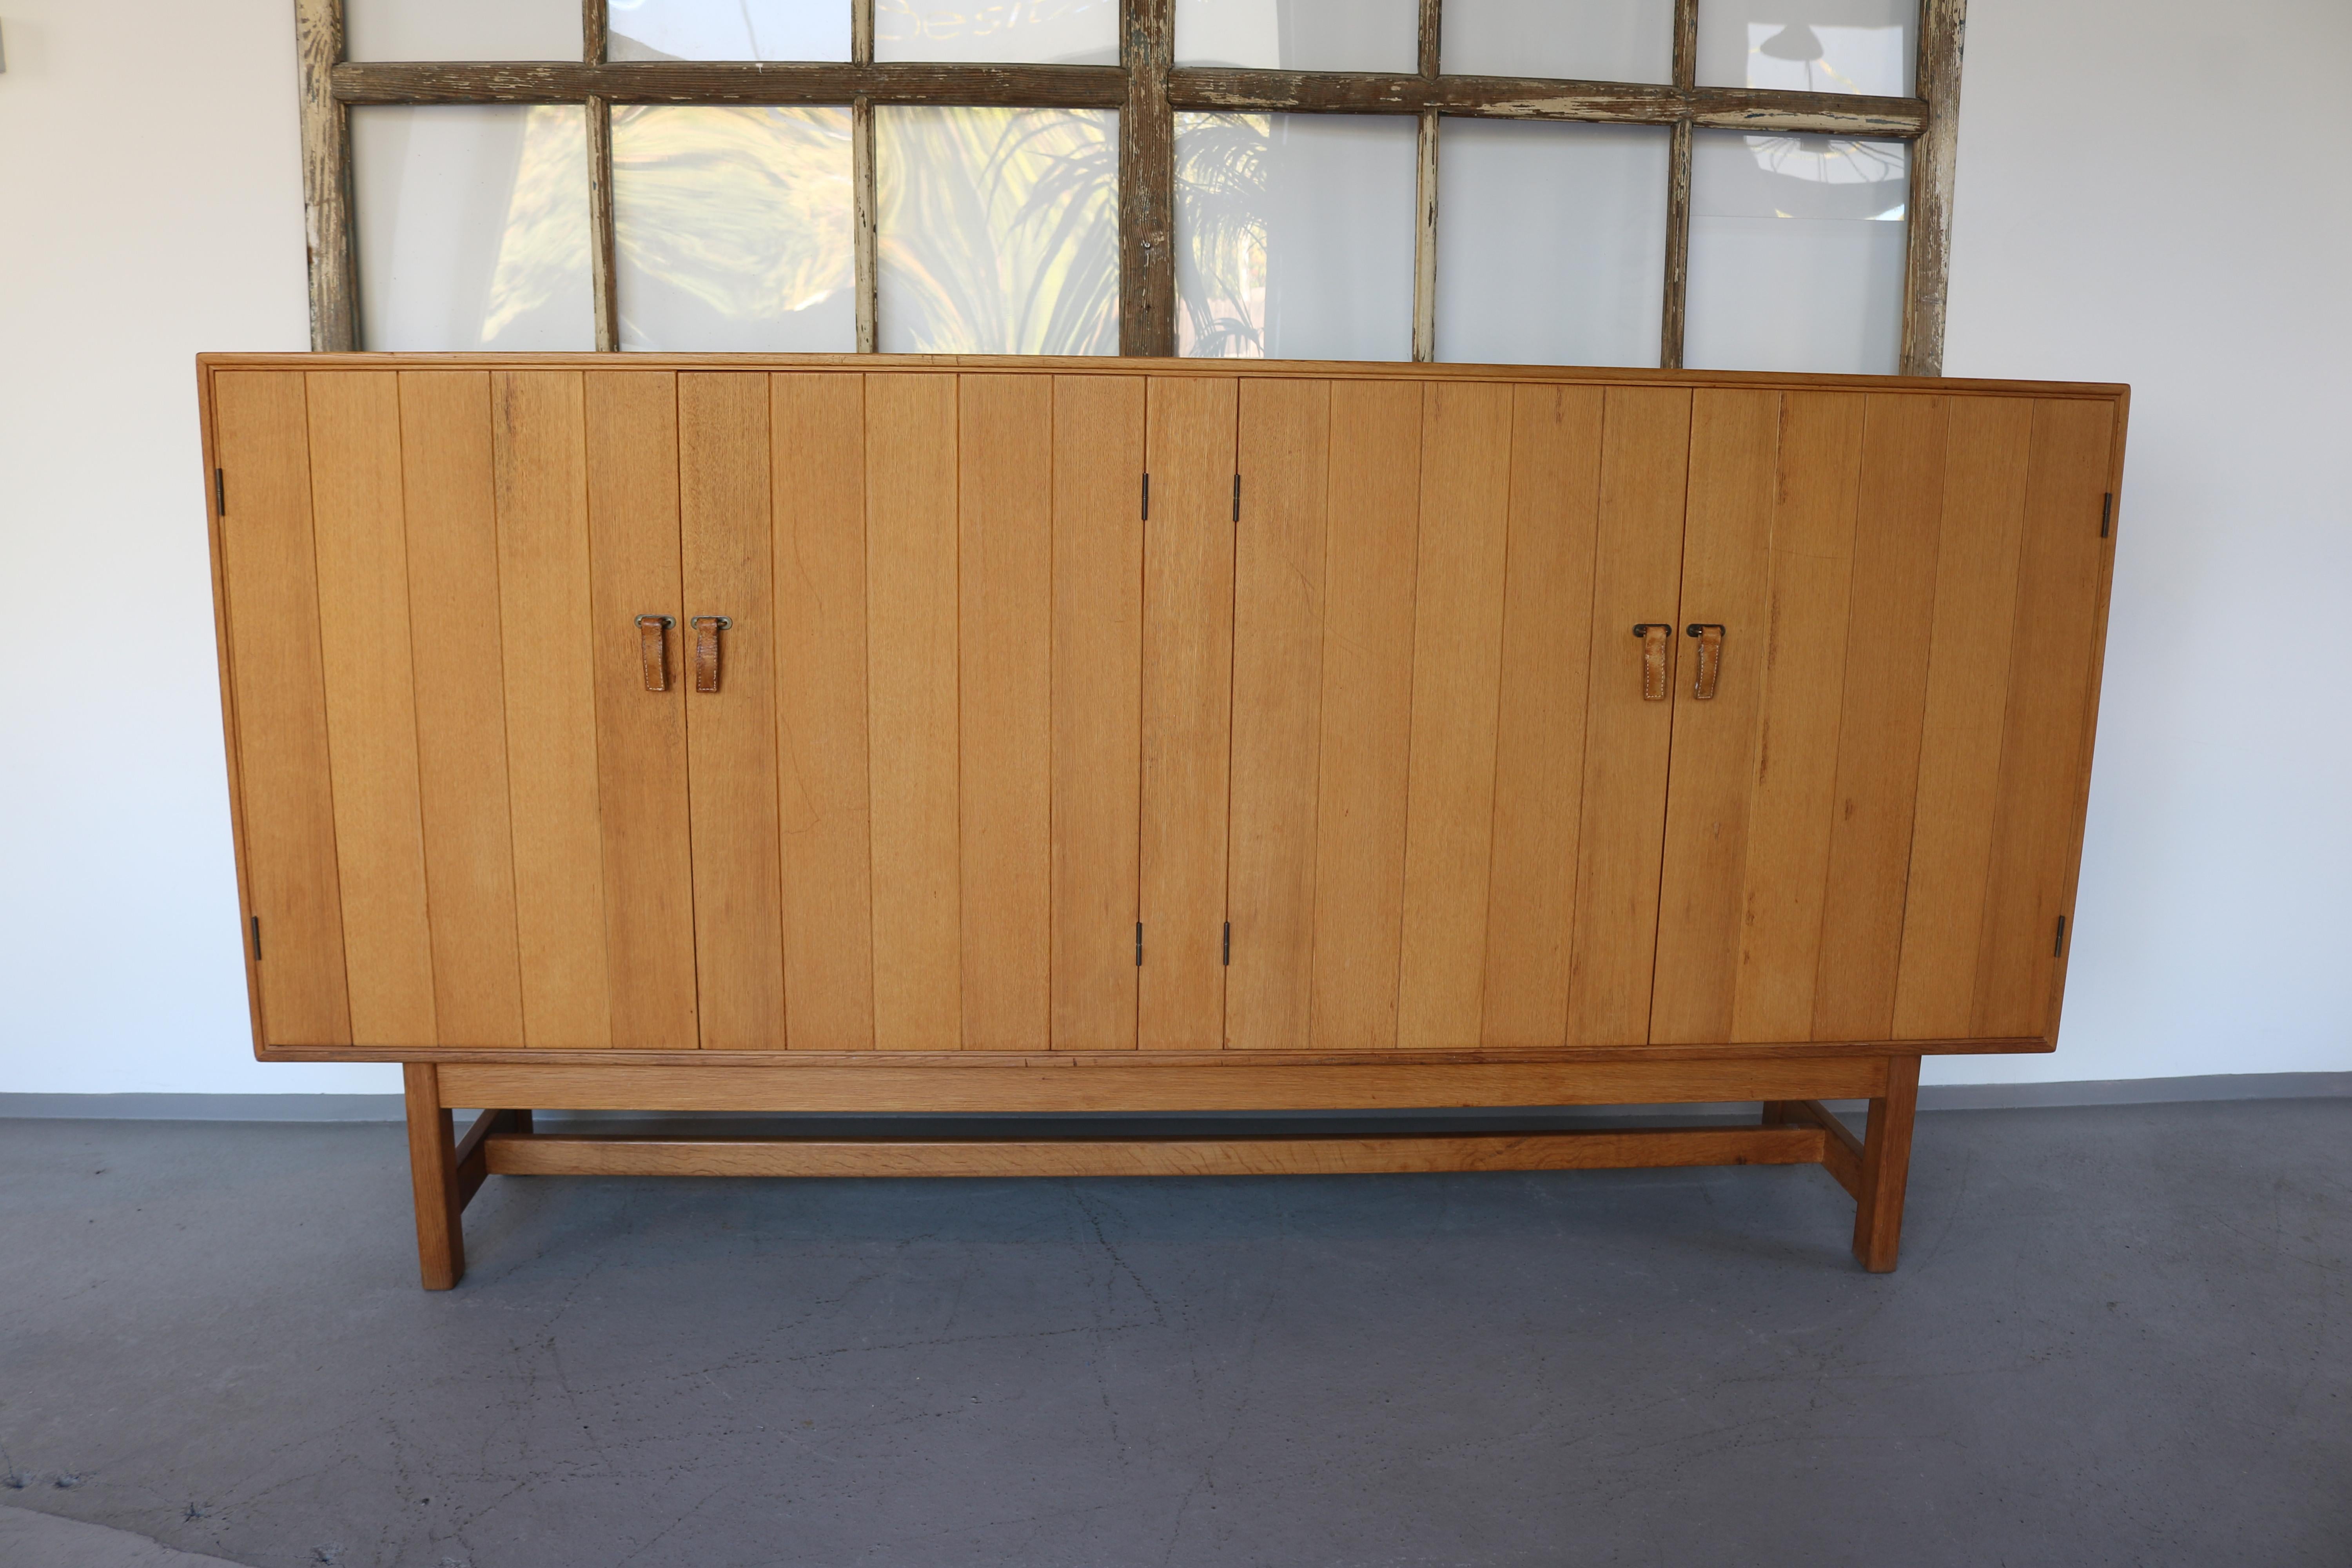 Very rare and exclusive large four-door sideboard in oak, with leather and brass handles.
Danish work by designer Kurt Ostervig, edited by HC Mobler, dating from the 1960s.